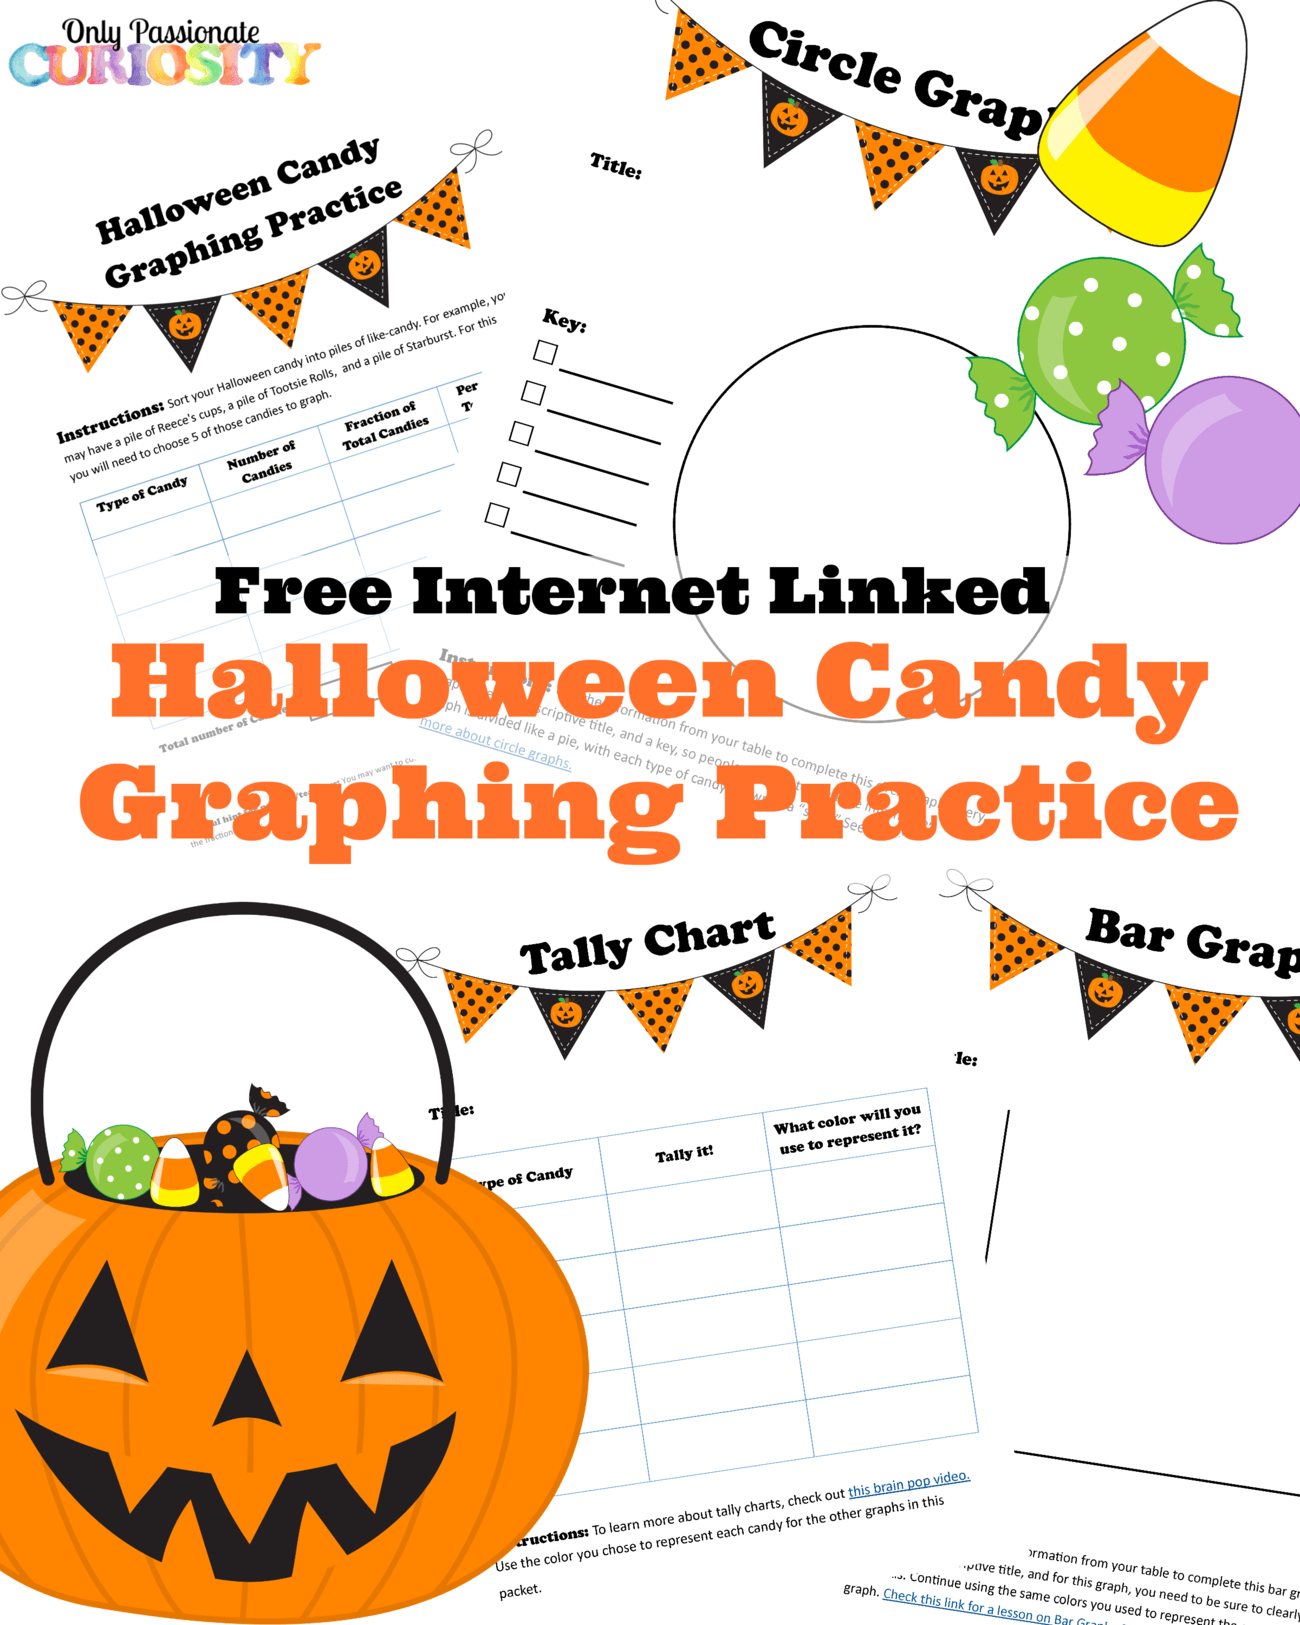 Halloween Candy Graphing Practice {Free Printable} - Only